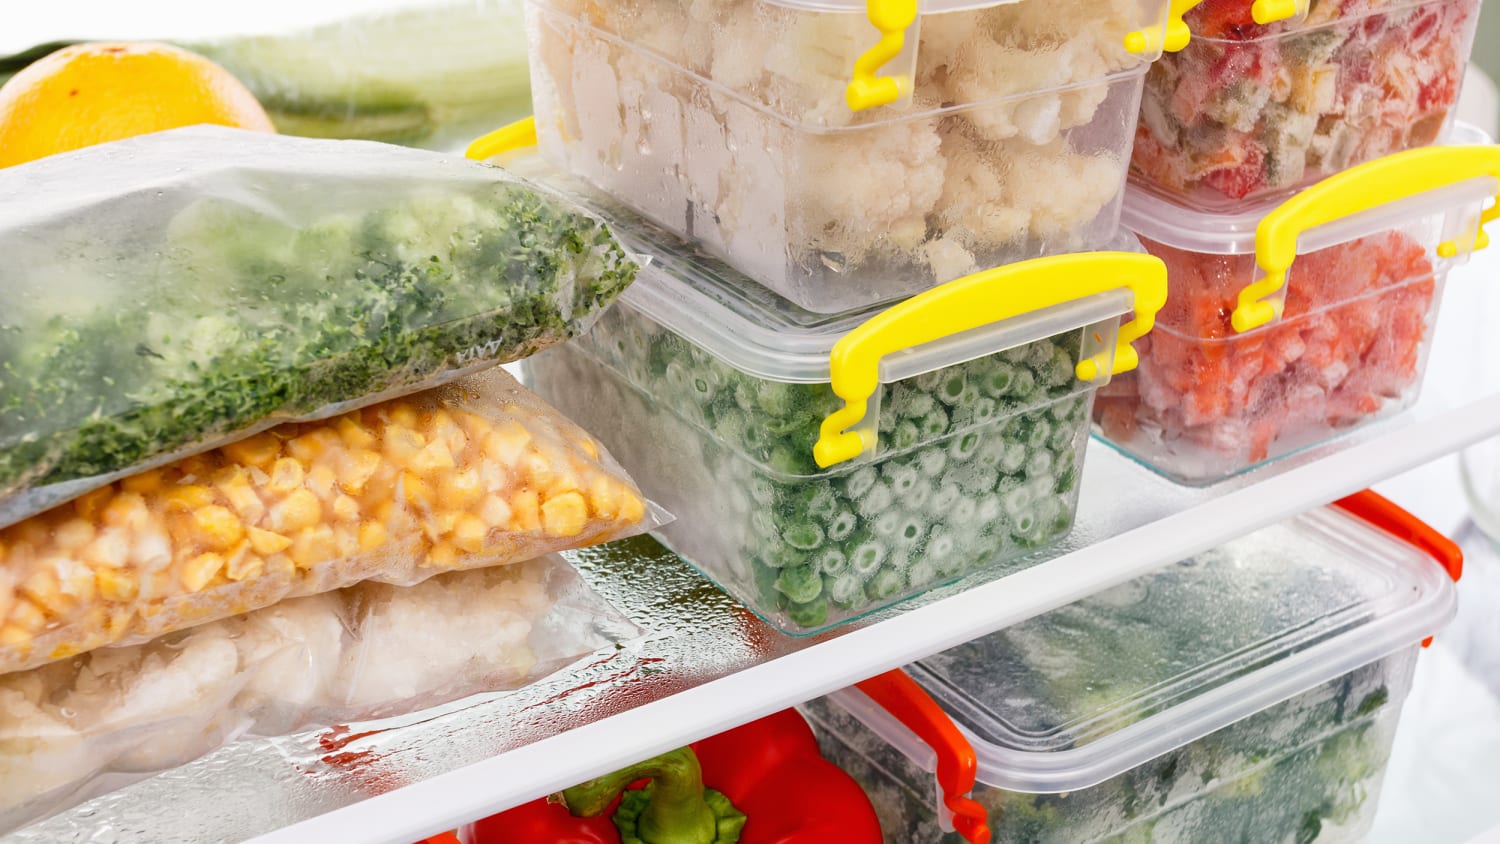 How to meal prep: 6 easy tips to become a batch-cooking pro